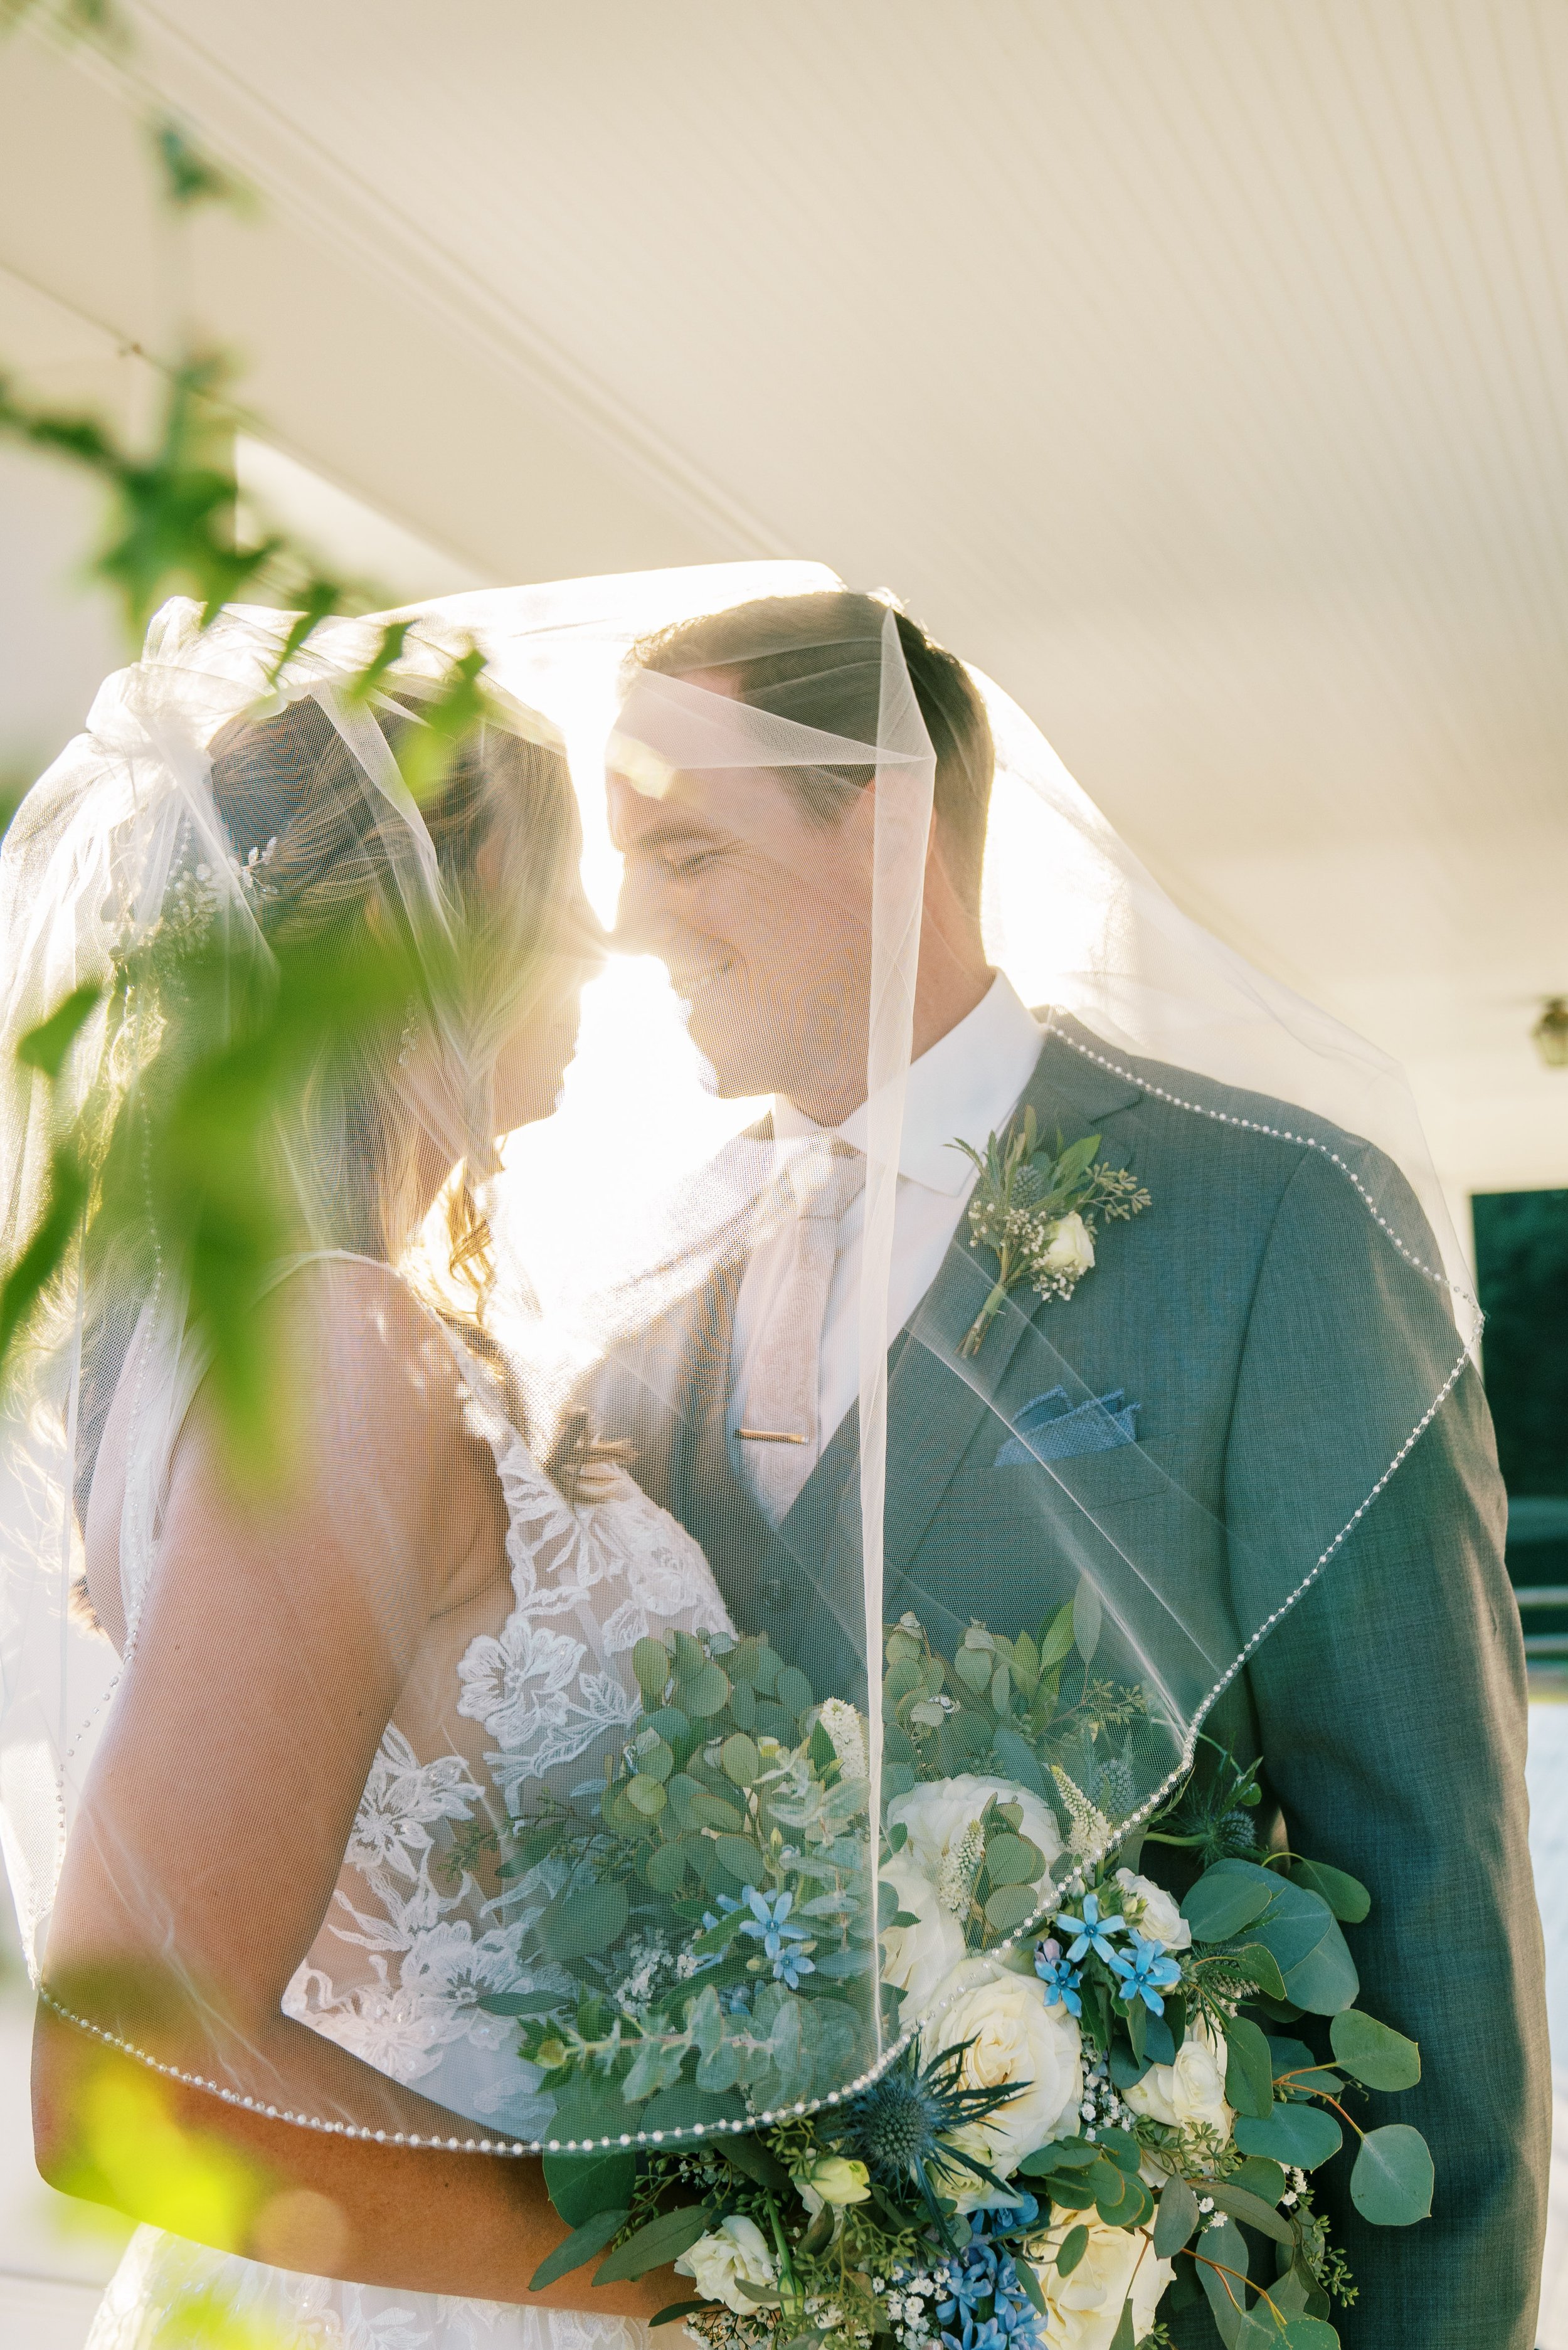  Bride and Groom Veil Photo Walnut Hill Wedding Venue Fancy This Photography